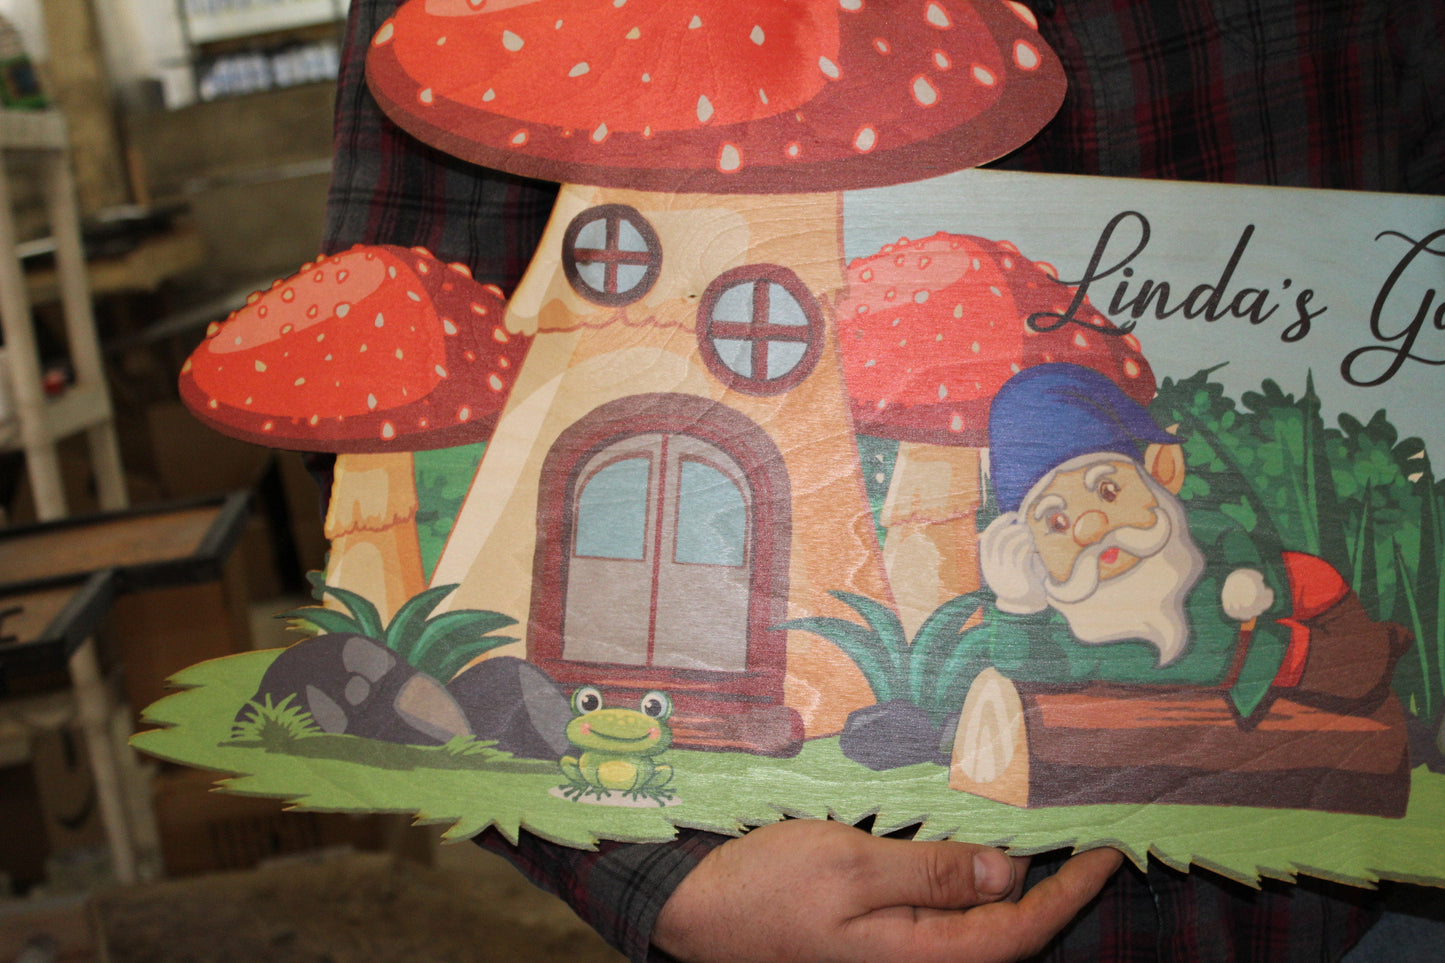 Large Lounging Gnome Mushroom Garden Sign Custom with UV Ink Printed Extra Detail We Use Your Actual Graphic and Contour Business Logo Wood